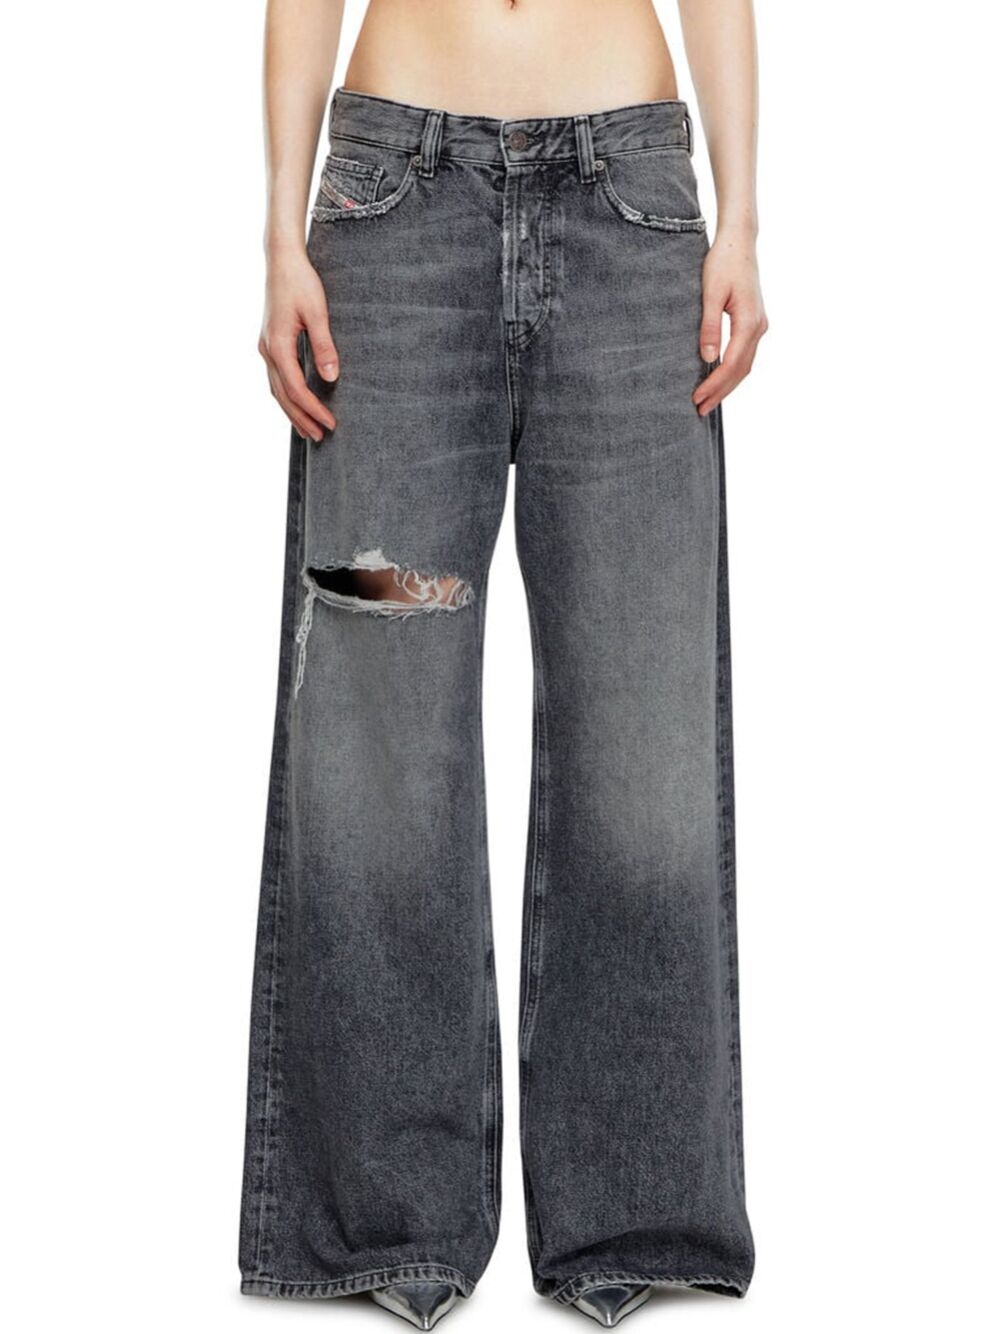 Straight jeans 1996 d-sire 007x4 - 3